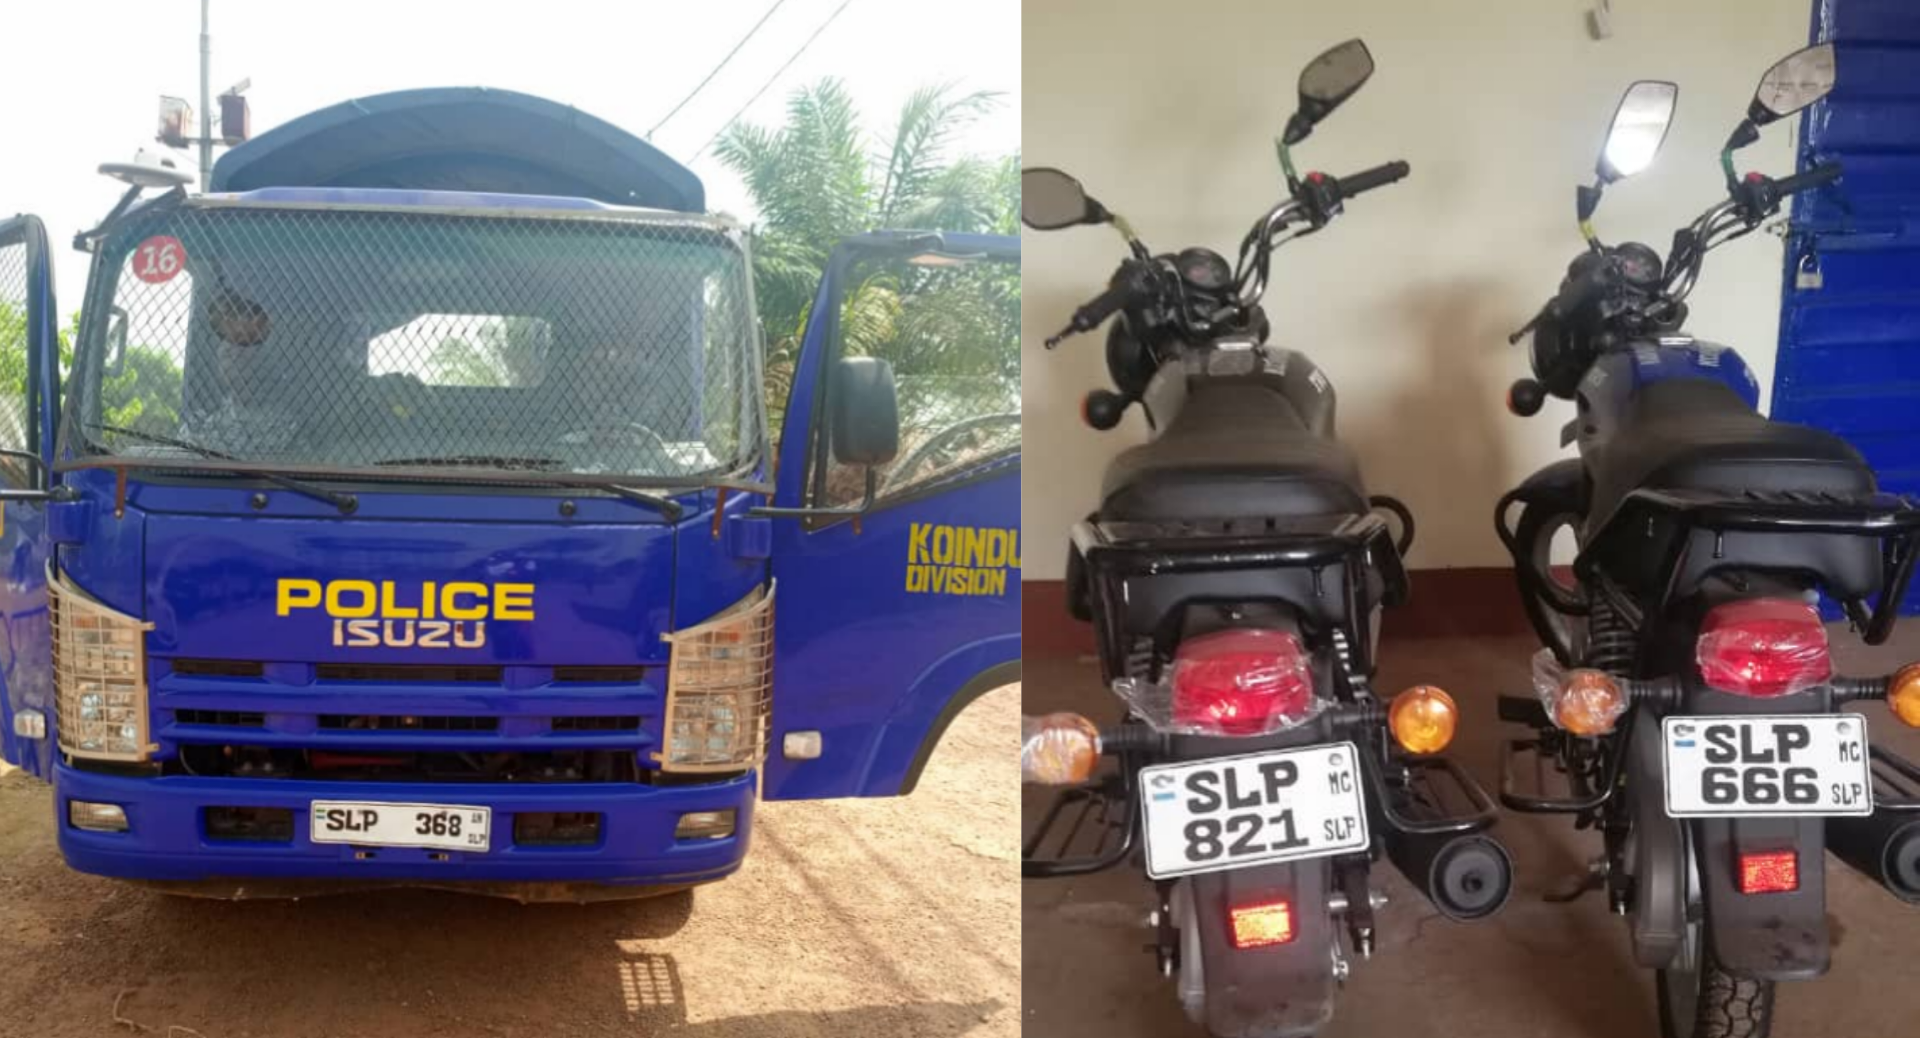 Koindu Police Division Empowered With Operational Truck And Motorcycles